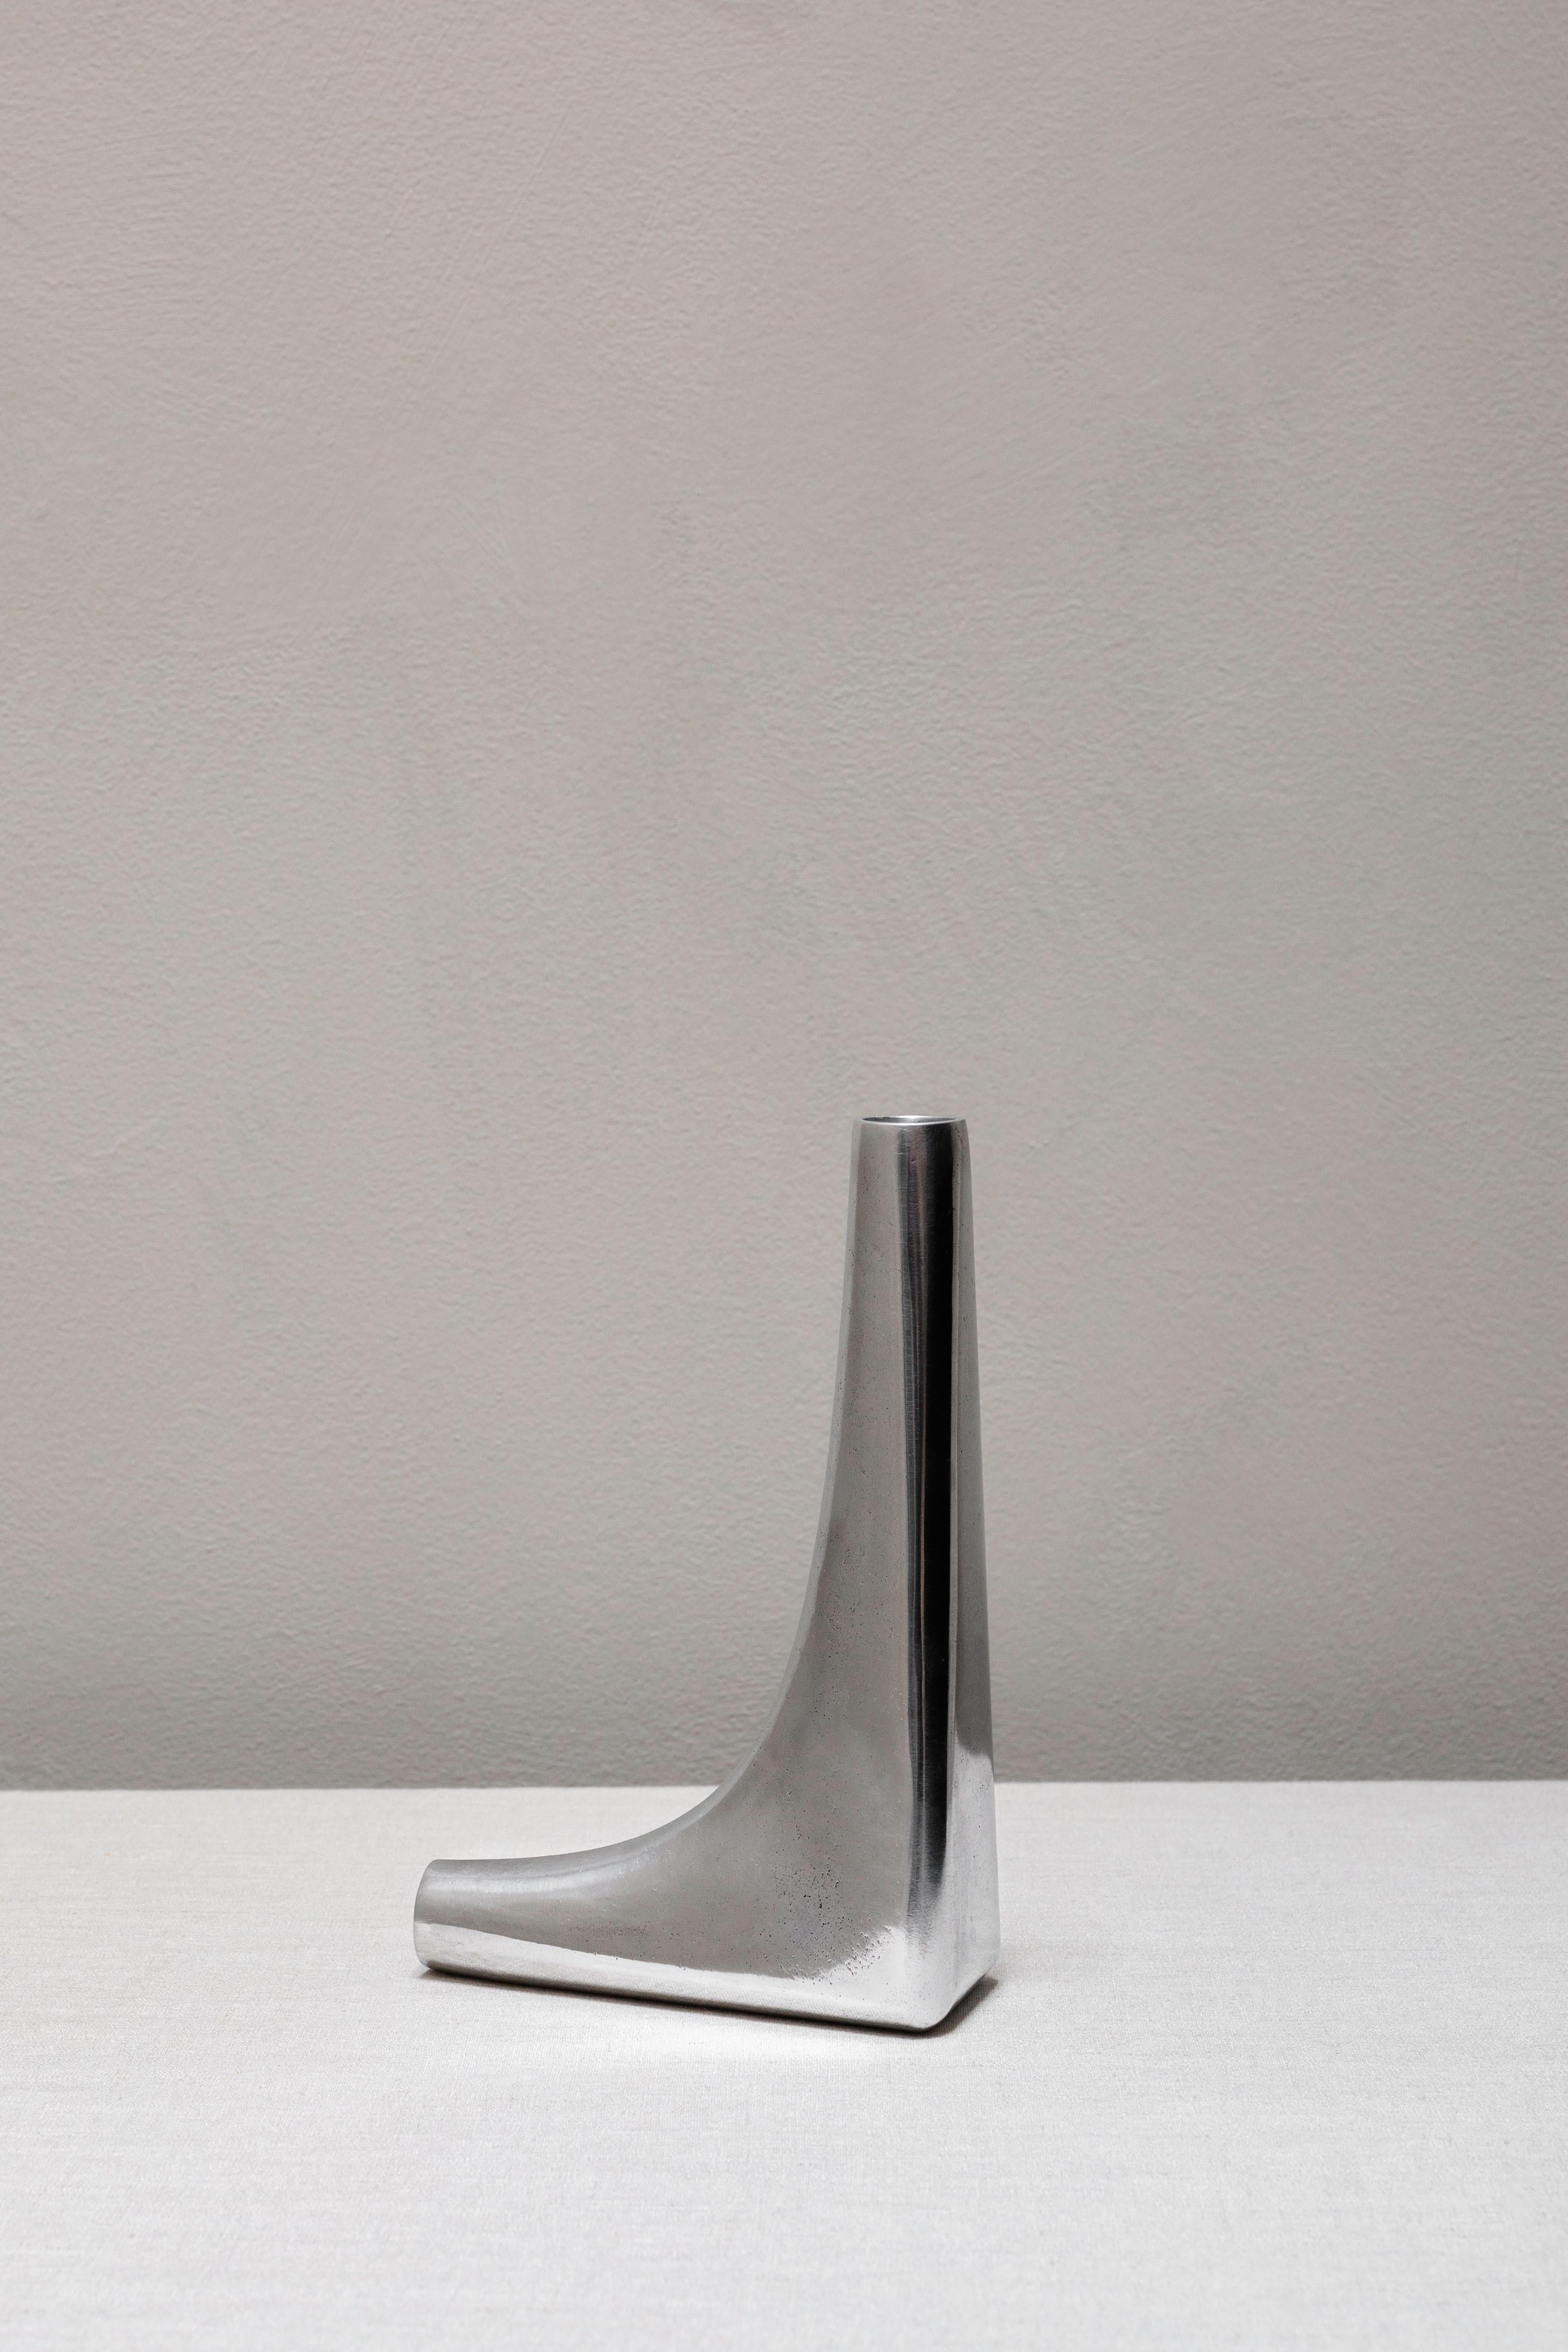 Portuguese Âncora Candle Holder in Semi Polished Aluminum Handcrafted in Portugal by Origin For Sale